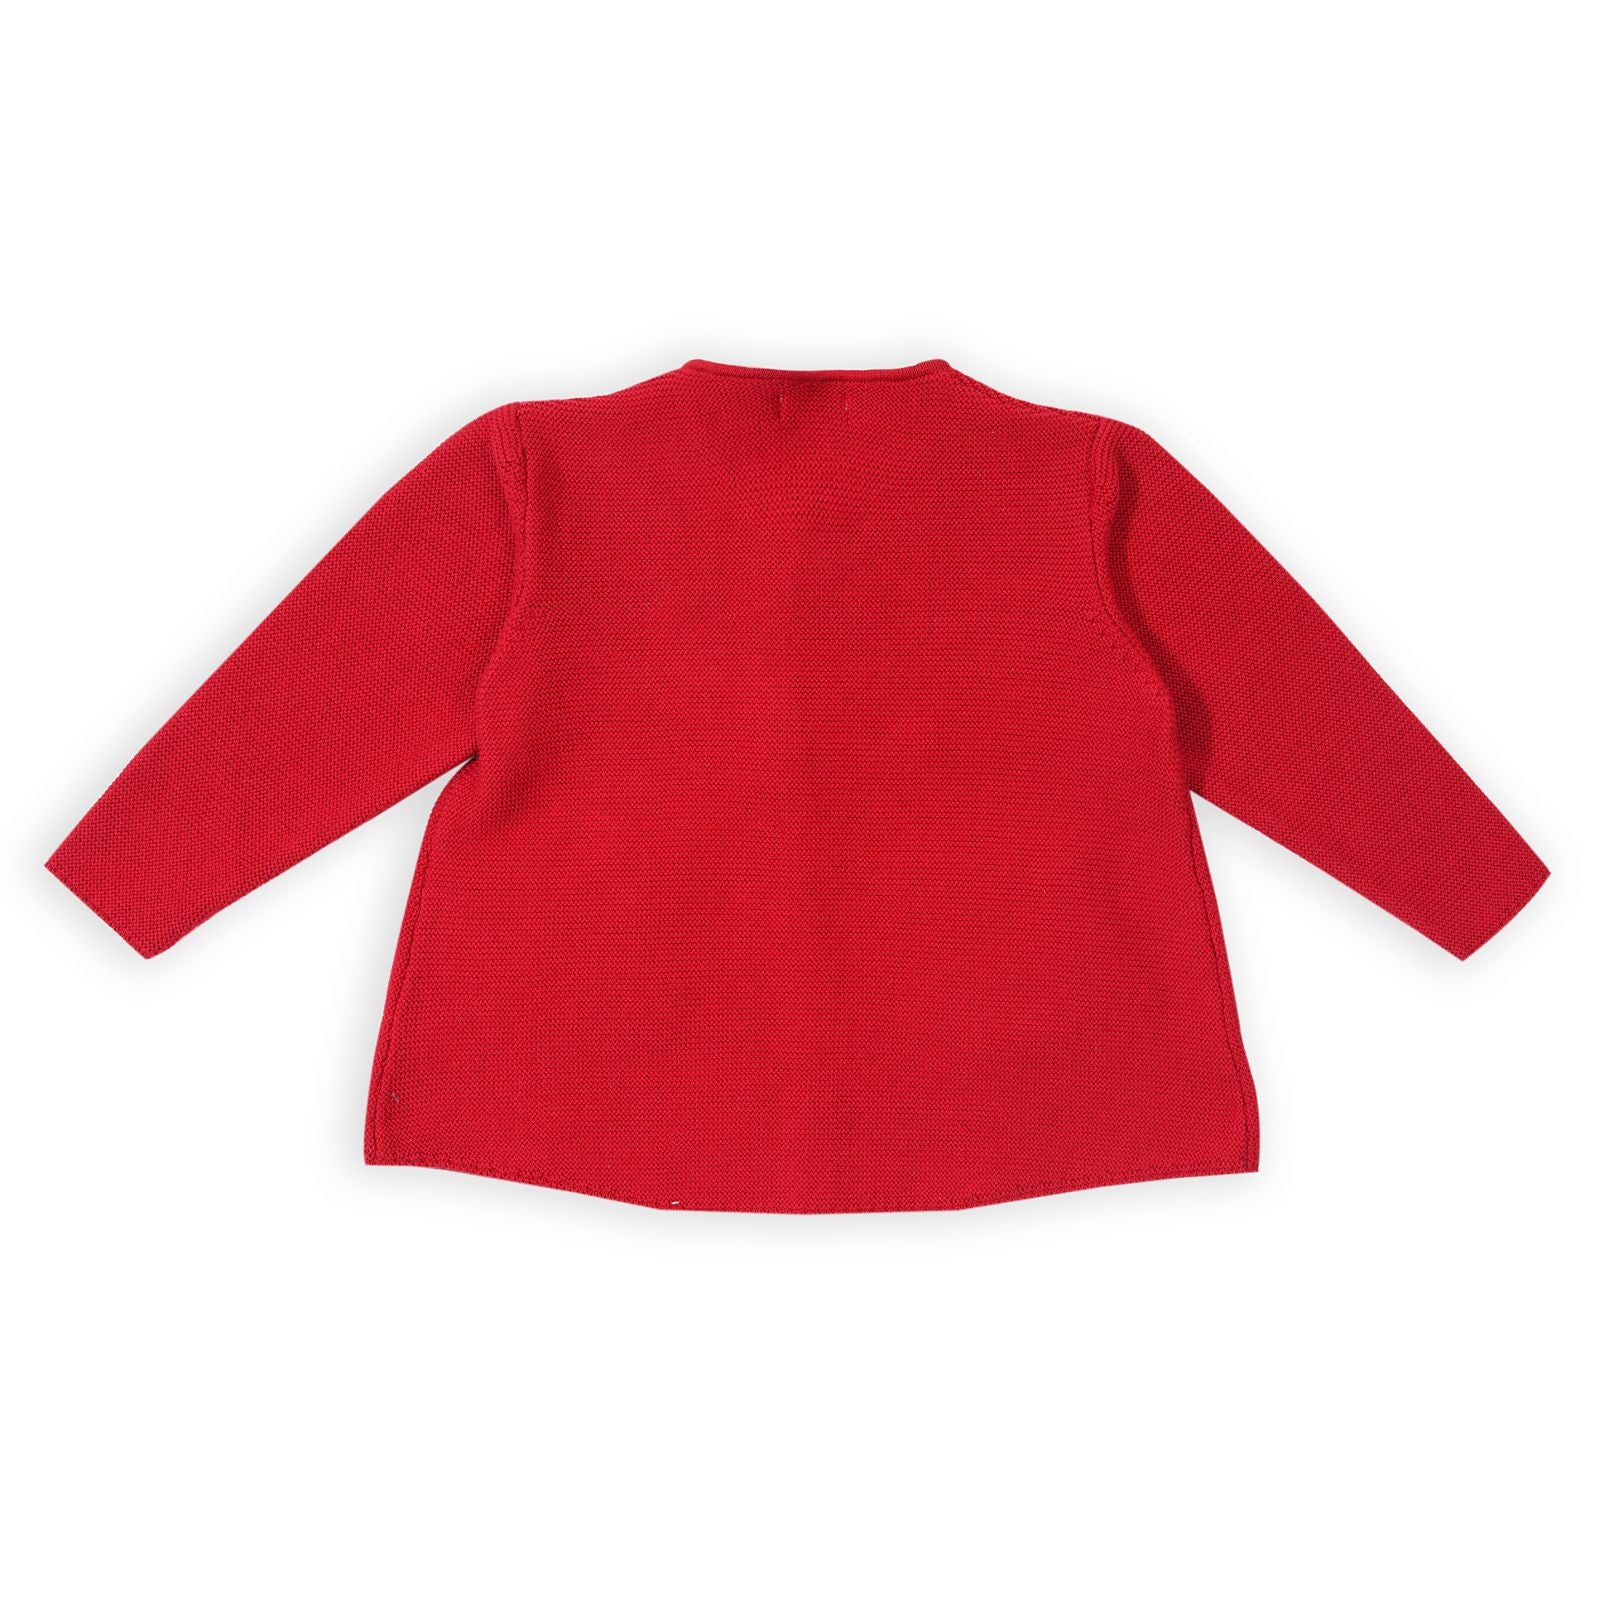 Overlap Christmas Sweater - Red 